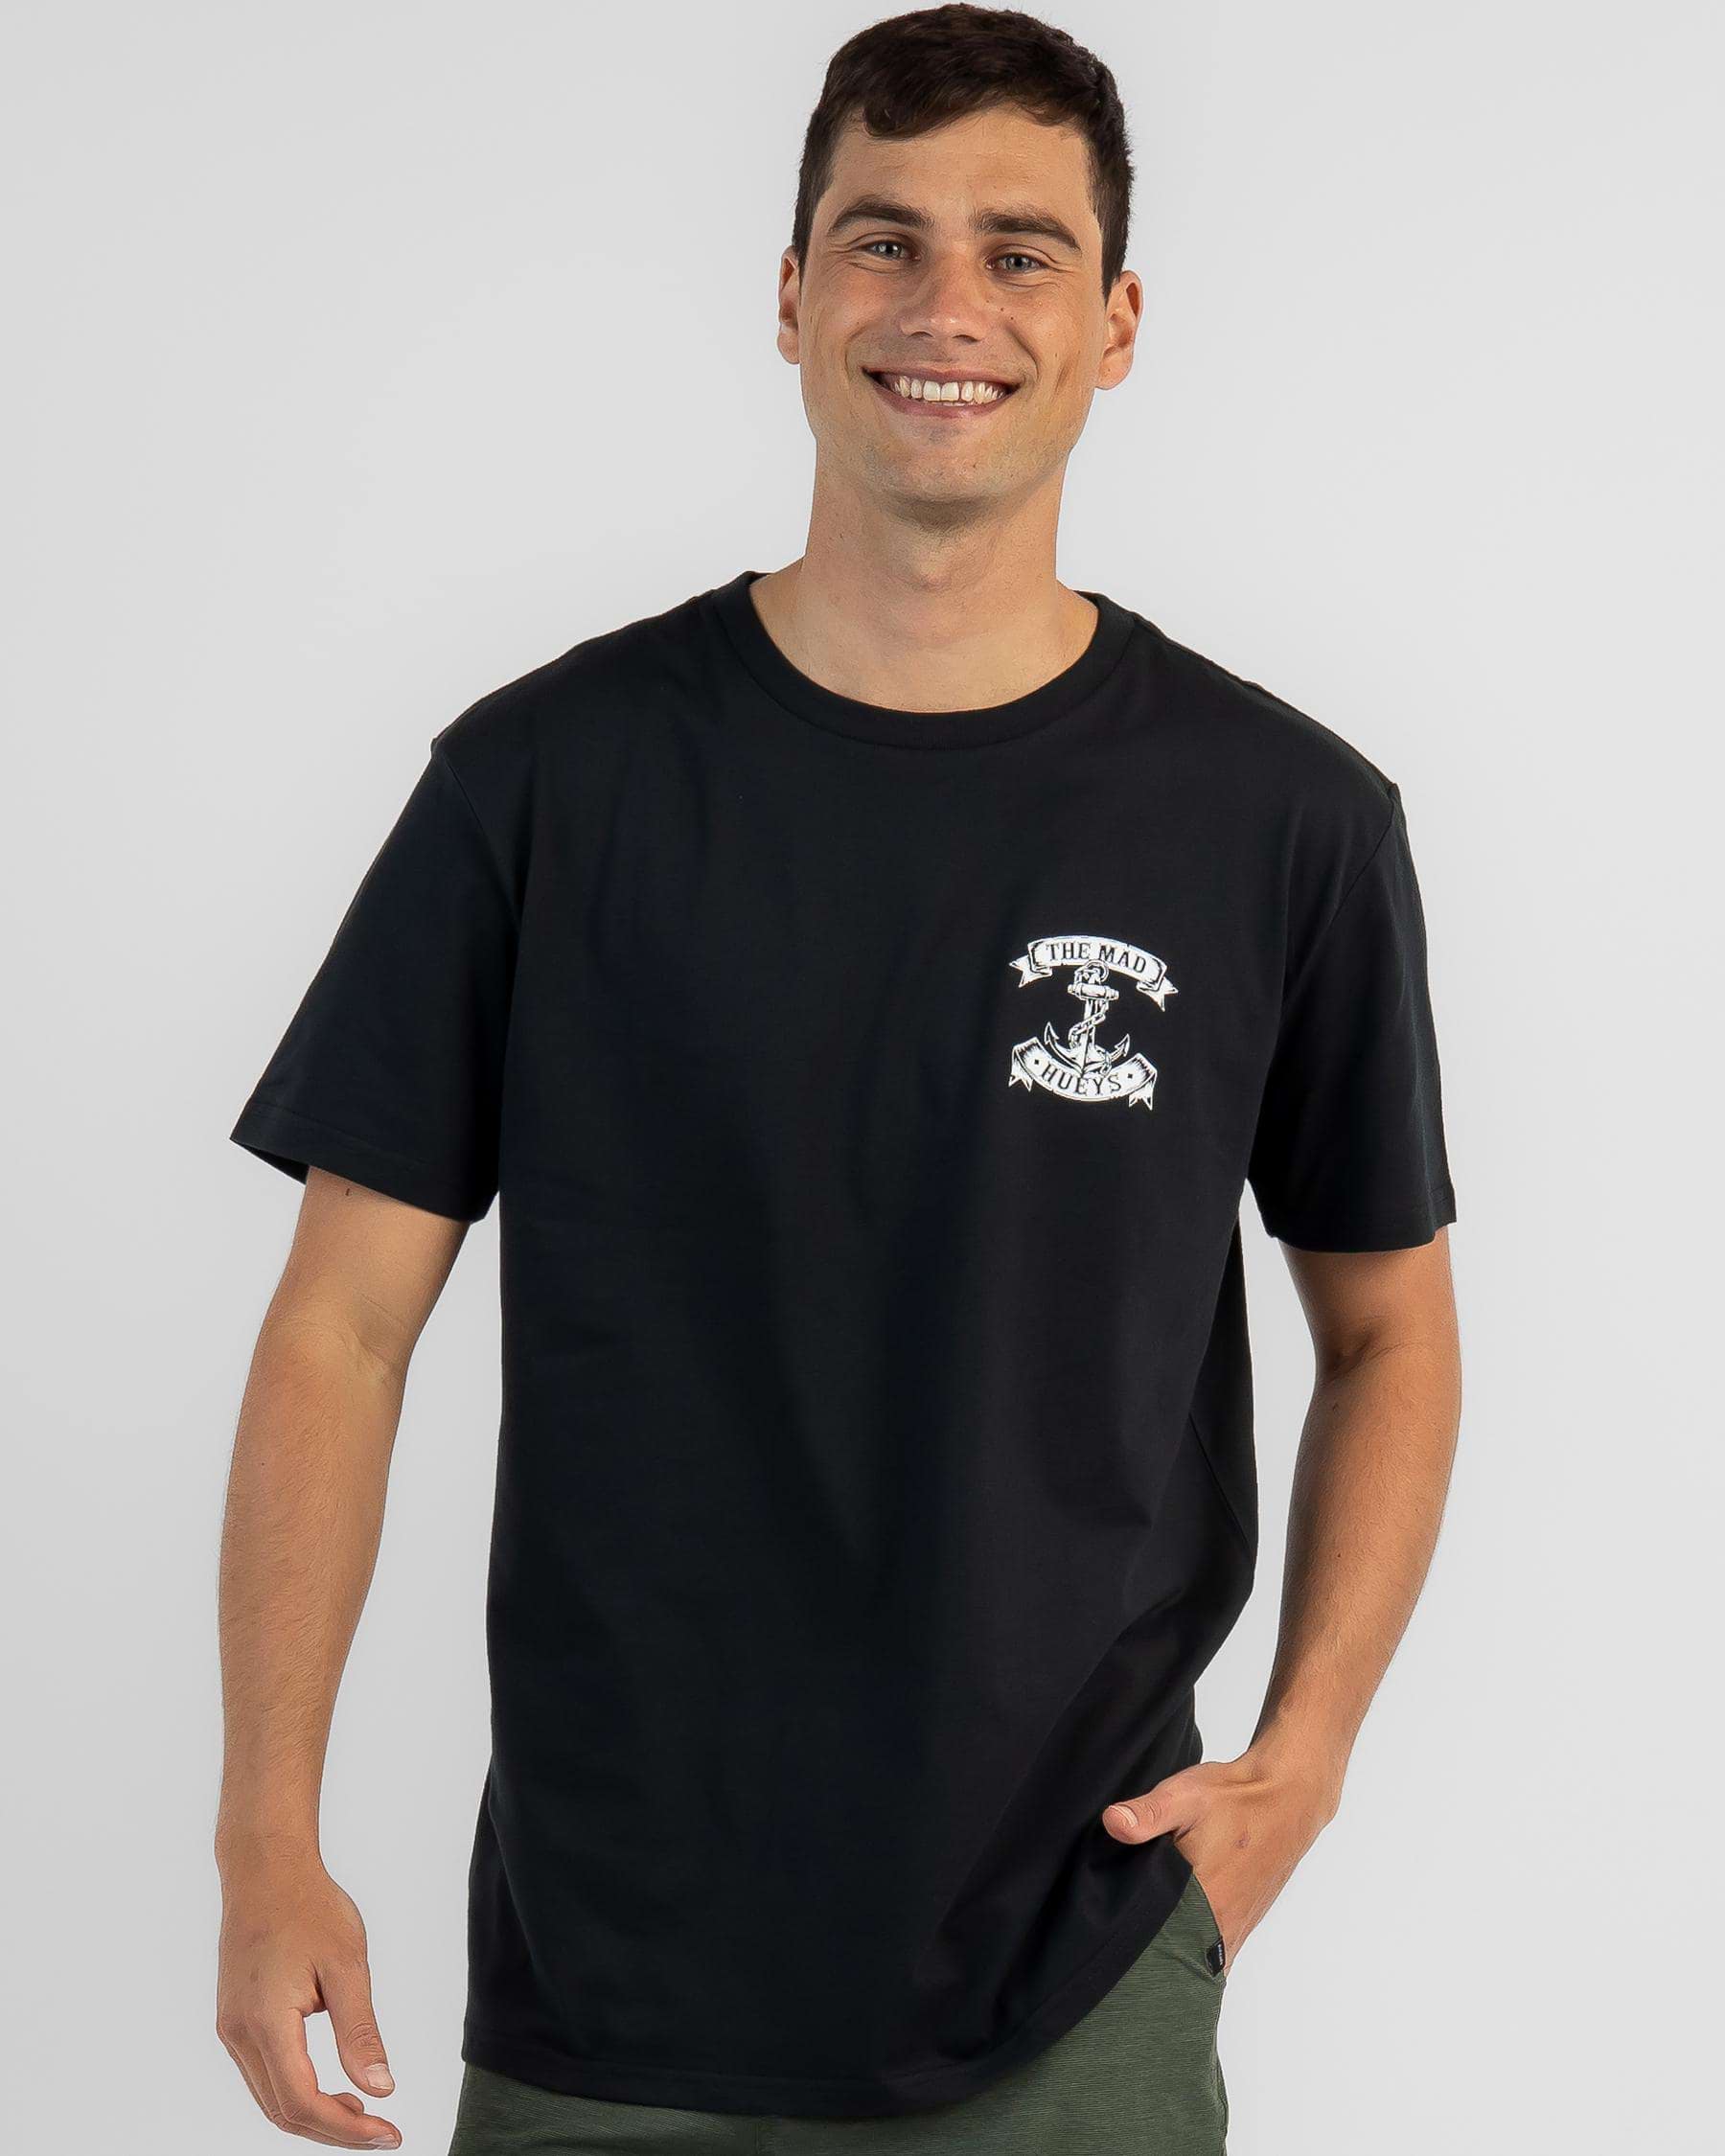 The Mad Hueys Ship Anchor T-Shirt In Black - Fast Shipping & Easy ...